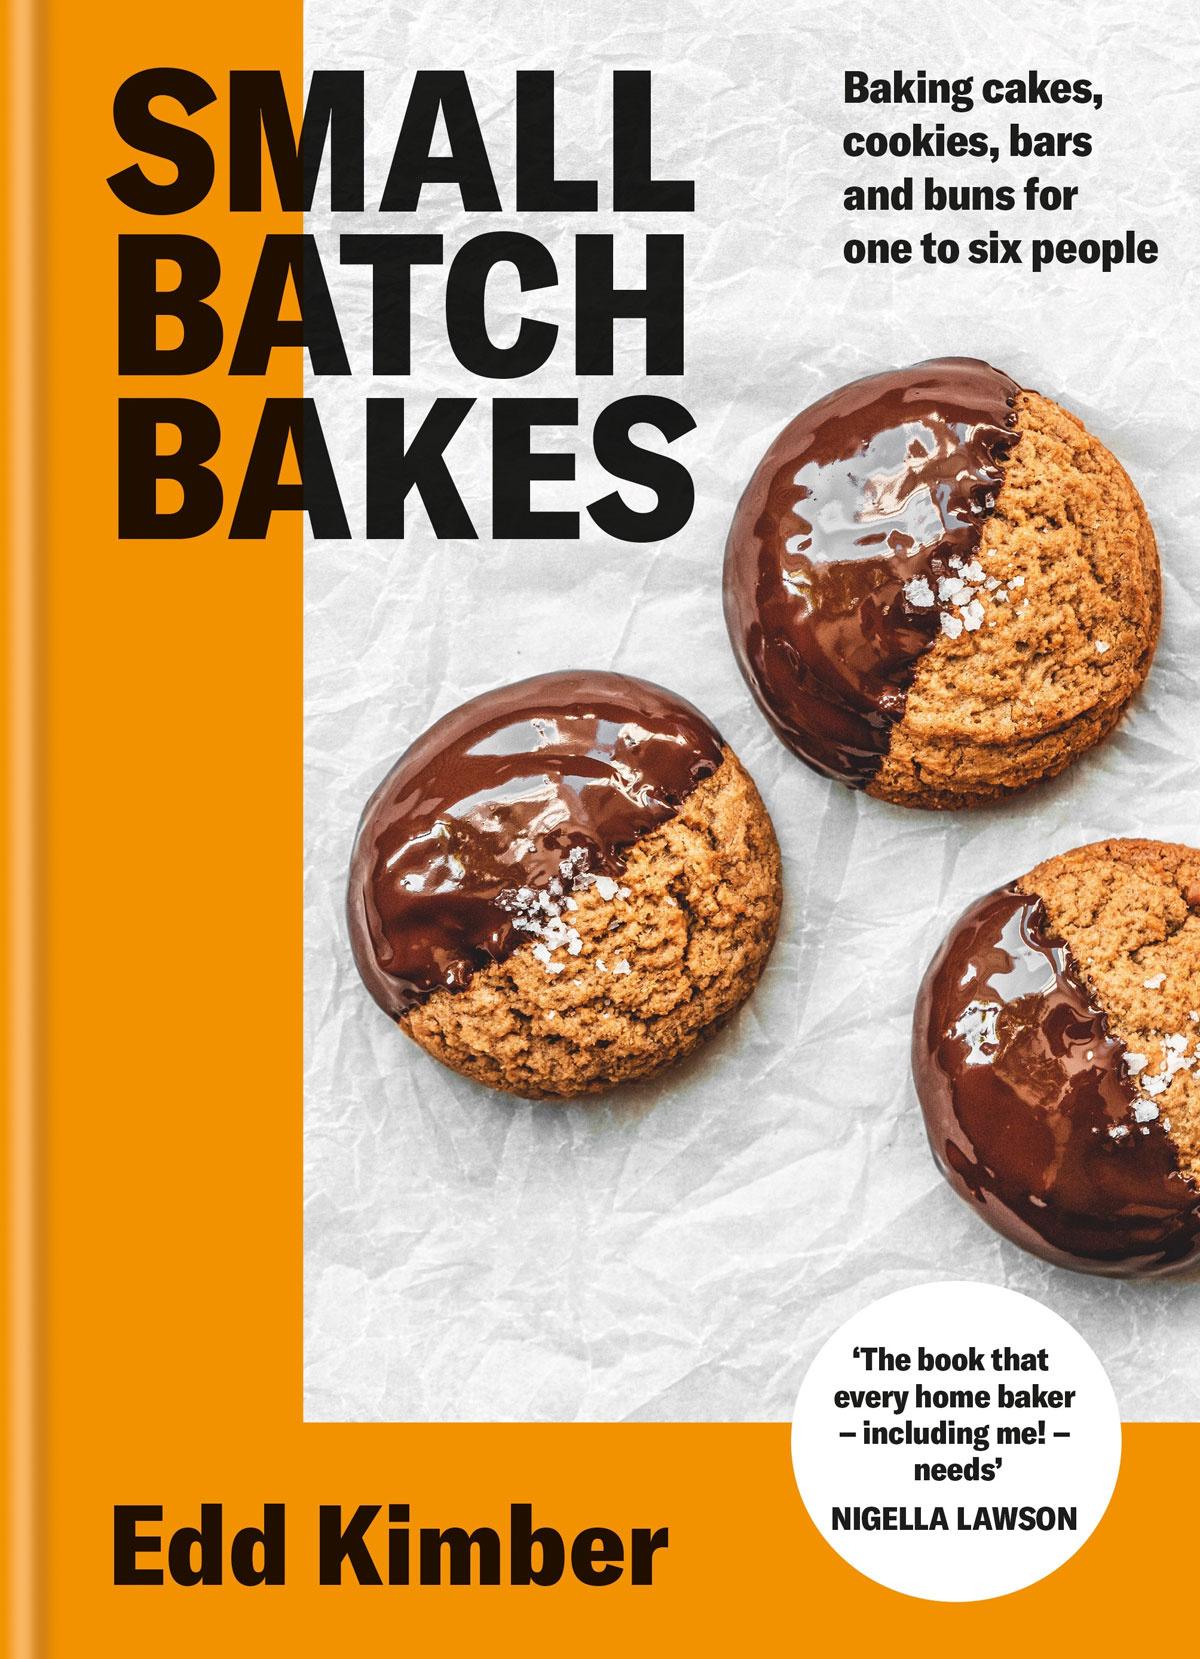 Book cover of Small Batch Bakes by Edd Kimber